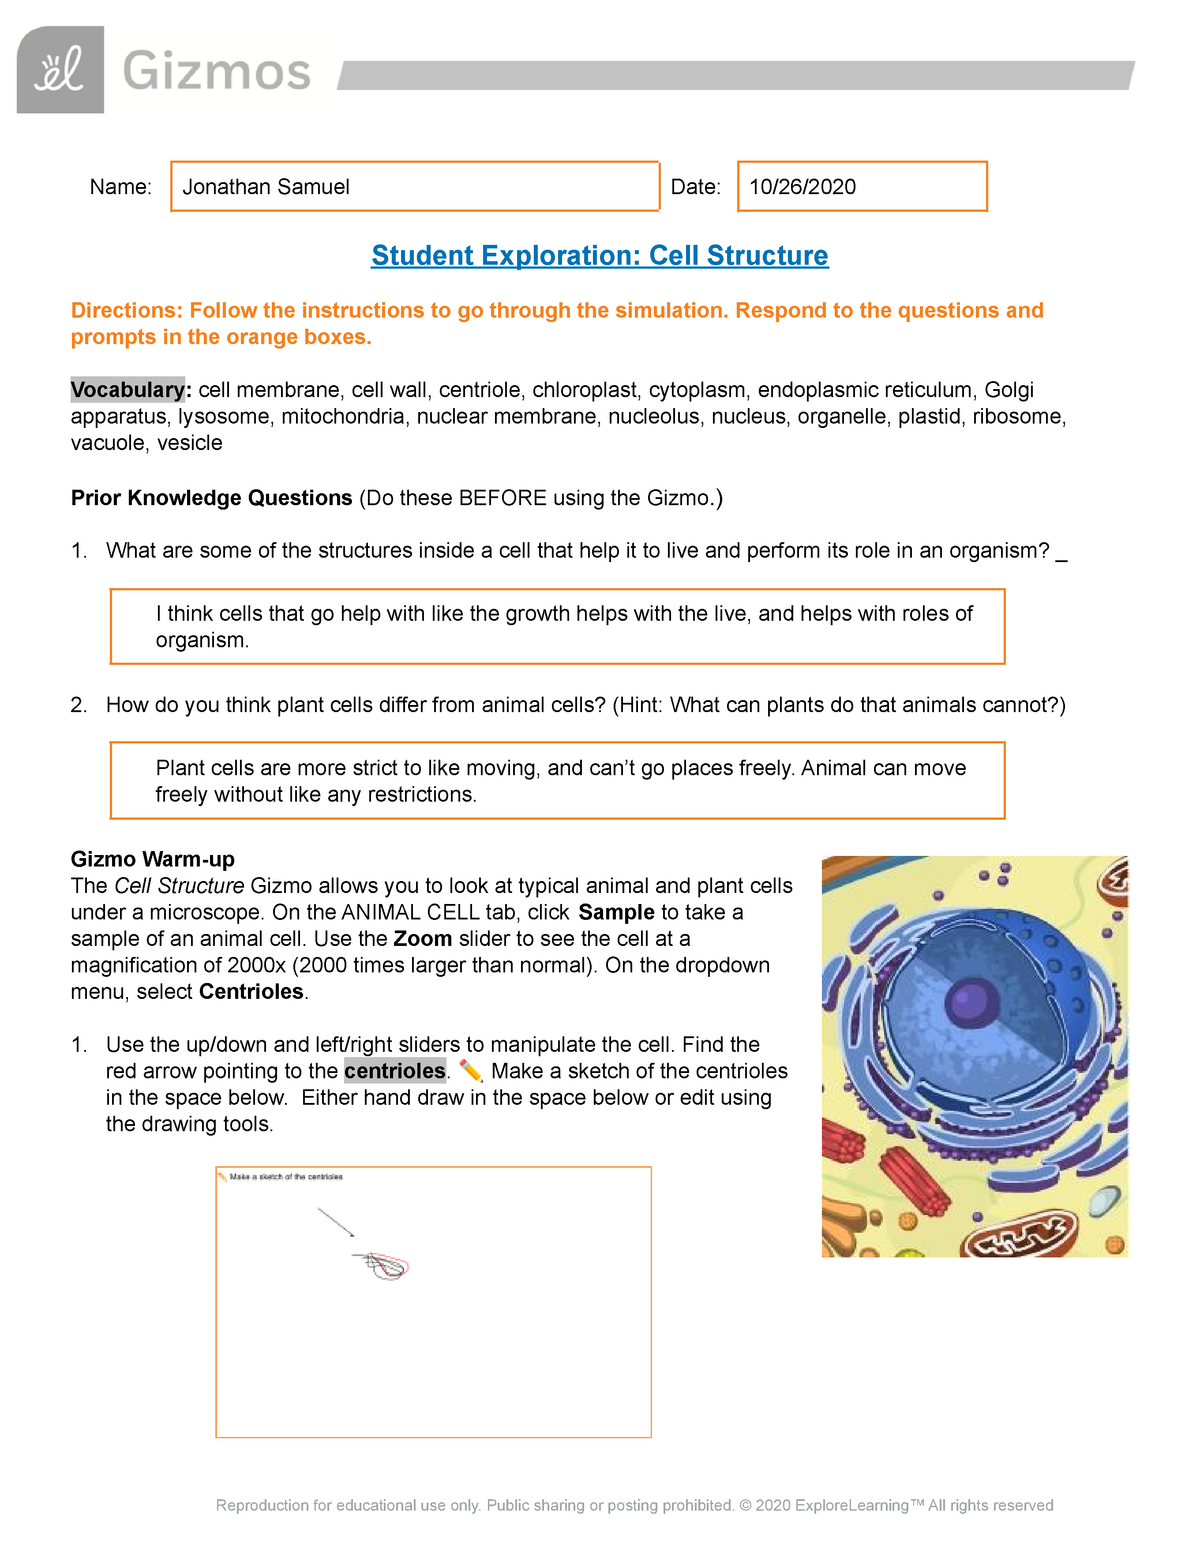 The Information That An Animal Cell Uses For Growth And Activities